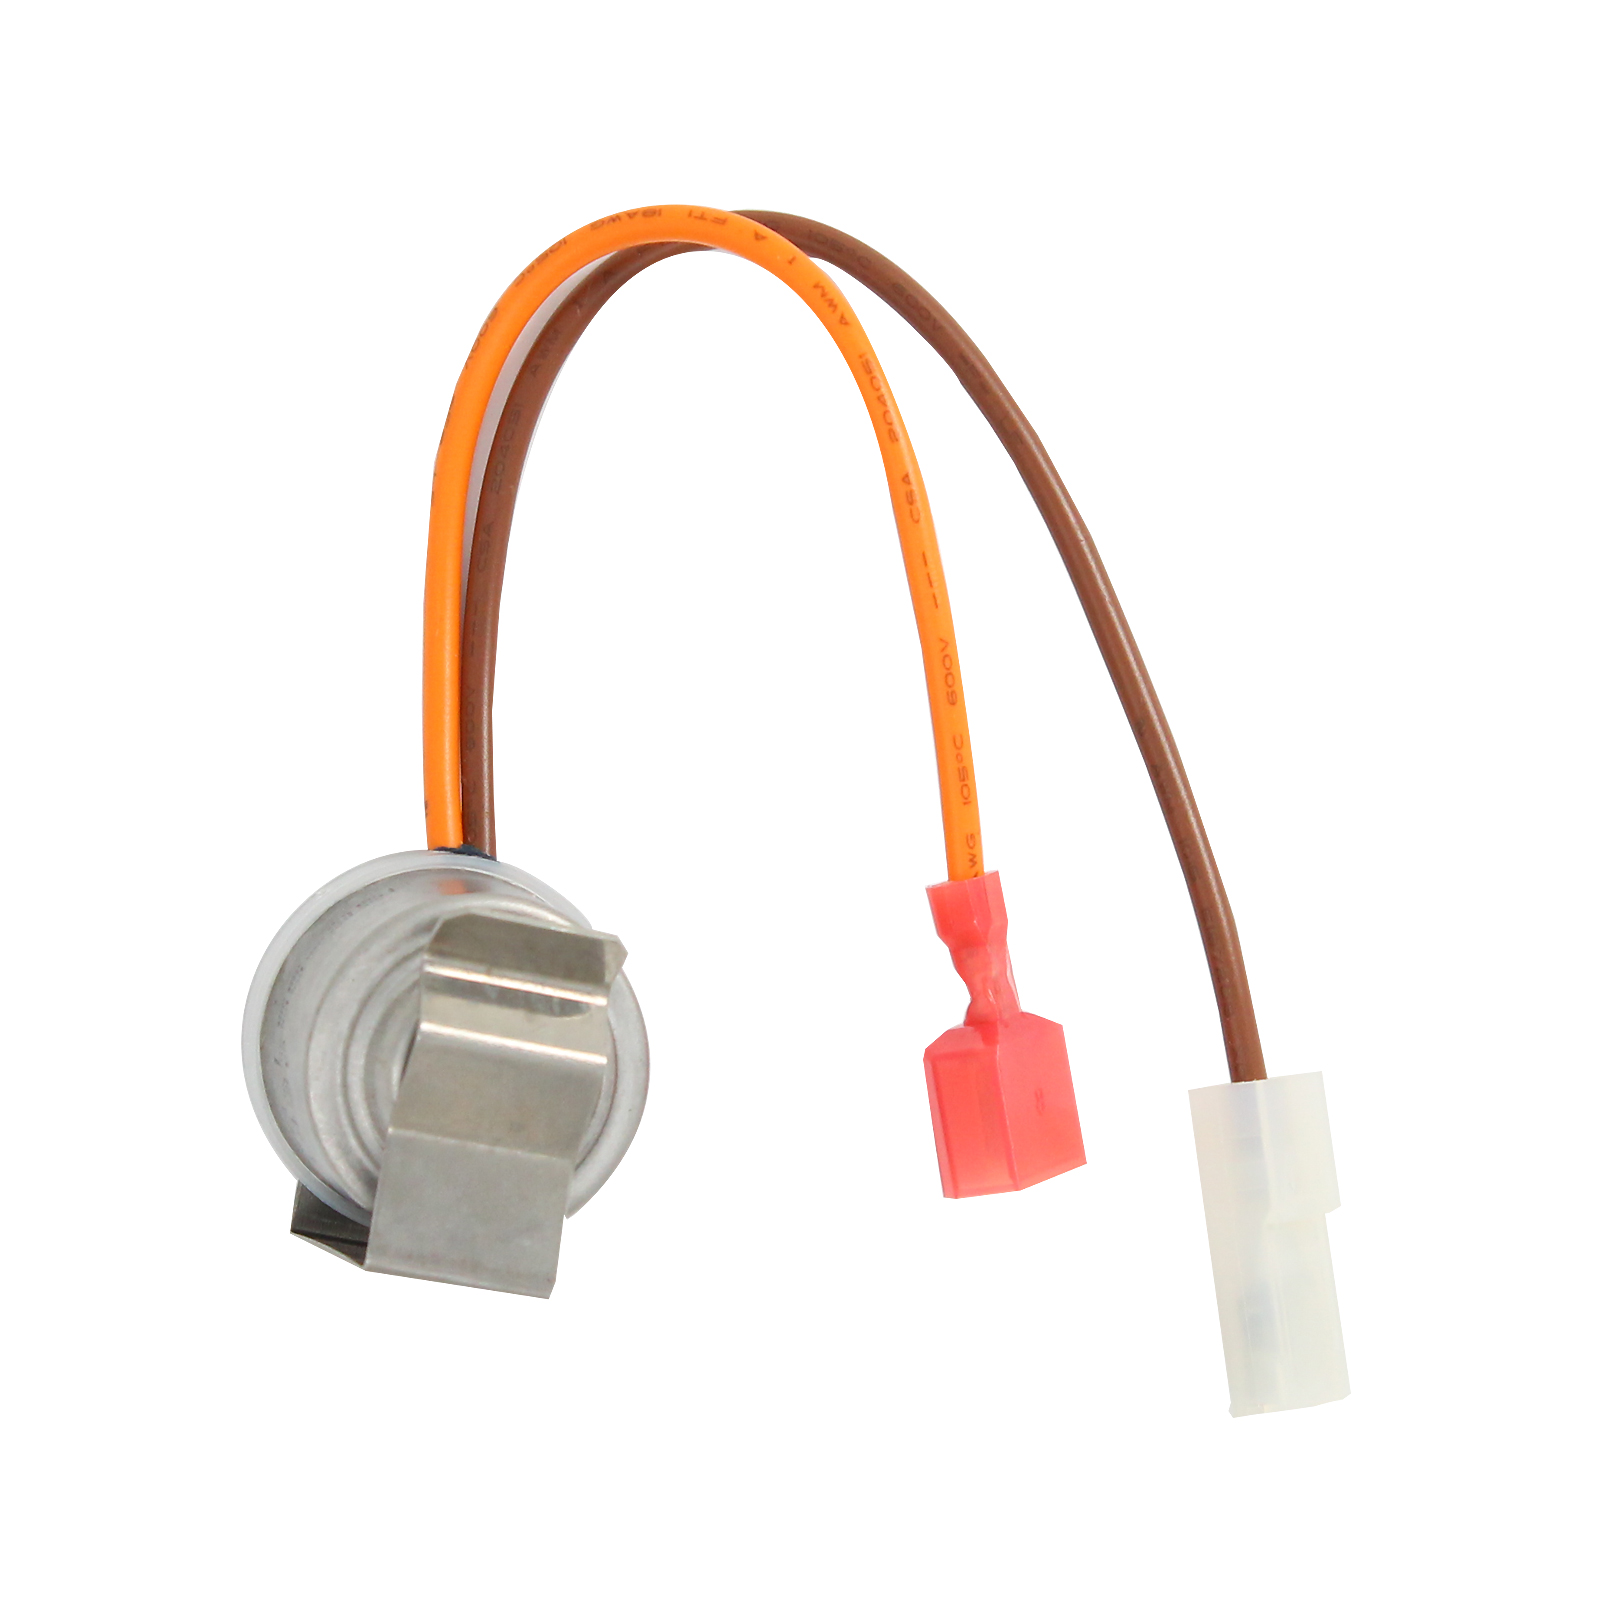 WP10442411 Refrigerator Defrost Thermostat Replacement for Amana BR22VE (P1325015W B) Refrigerator - Compatible with 10442411 Defrost Thermostat - image 3 of 4